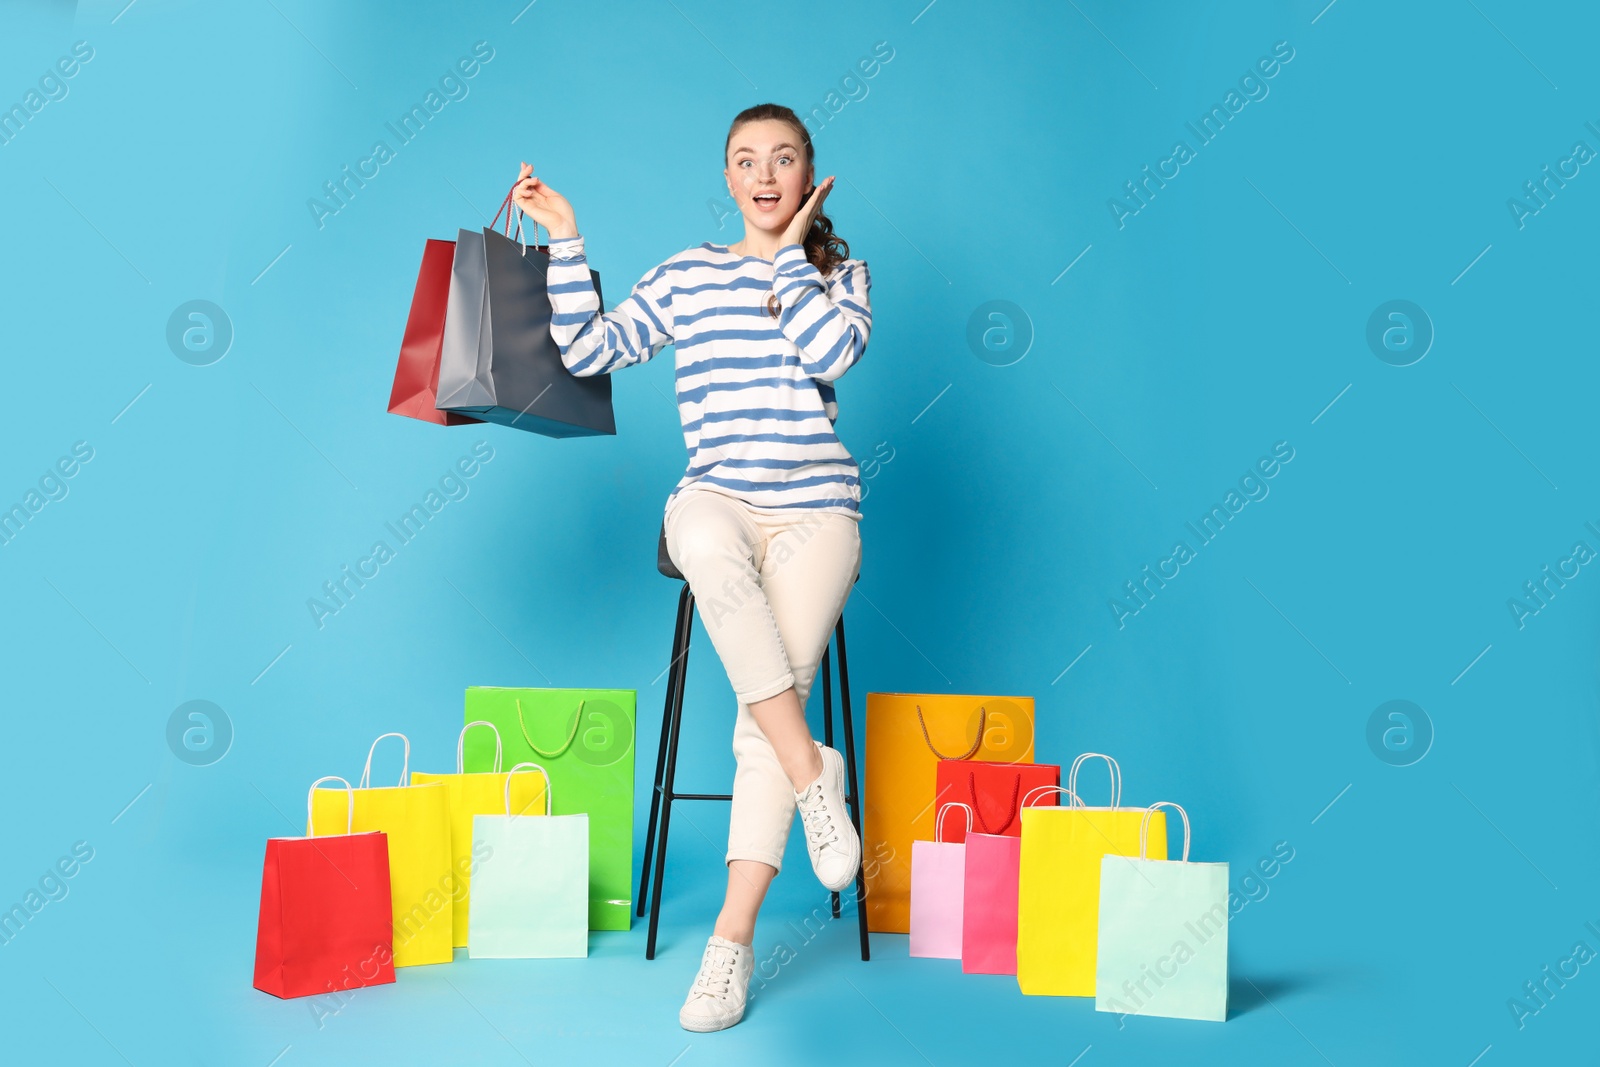 Photo of Excited woman holding colorful shopping bags on stool against light blue background